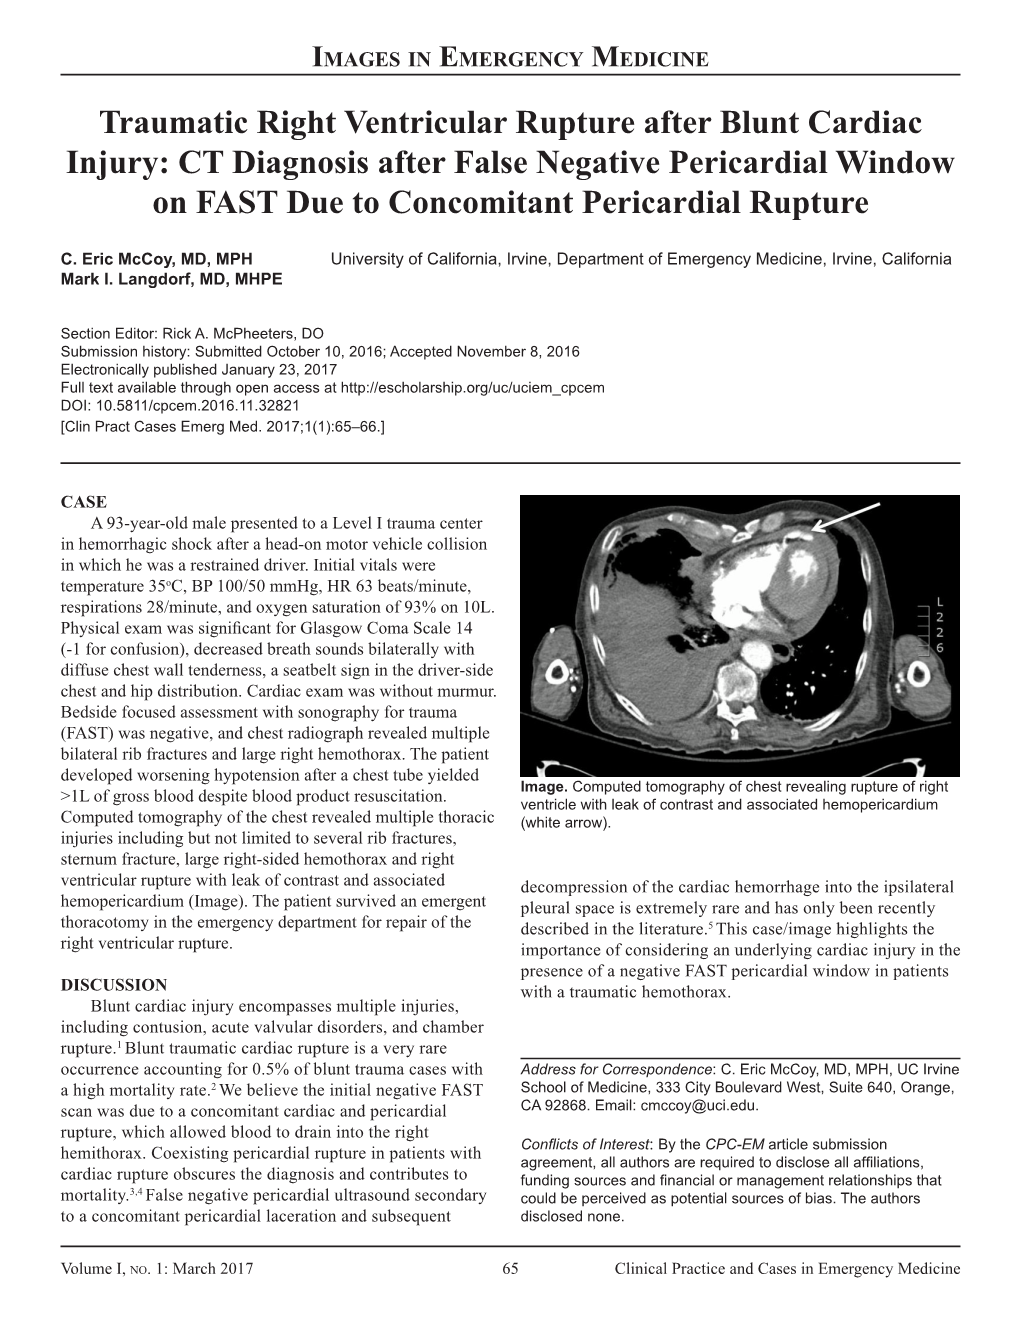 Traumatic Right Ventricular Rupture After Blunt Cardiac Injury: CT Diagnosis After False Negative Pericardial Window on FAST Due to Concomitant Pericardial Rupture